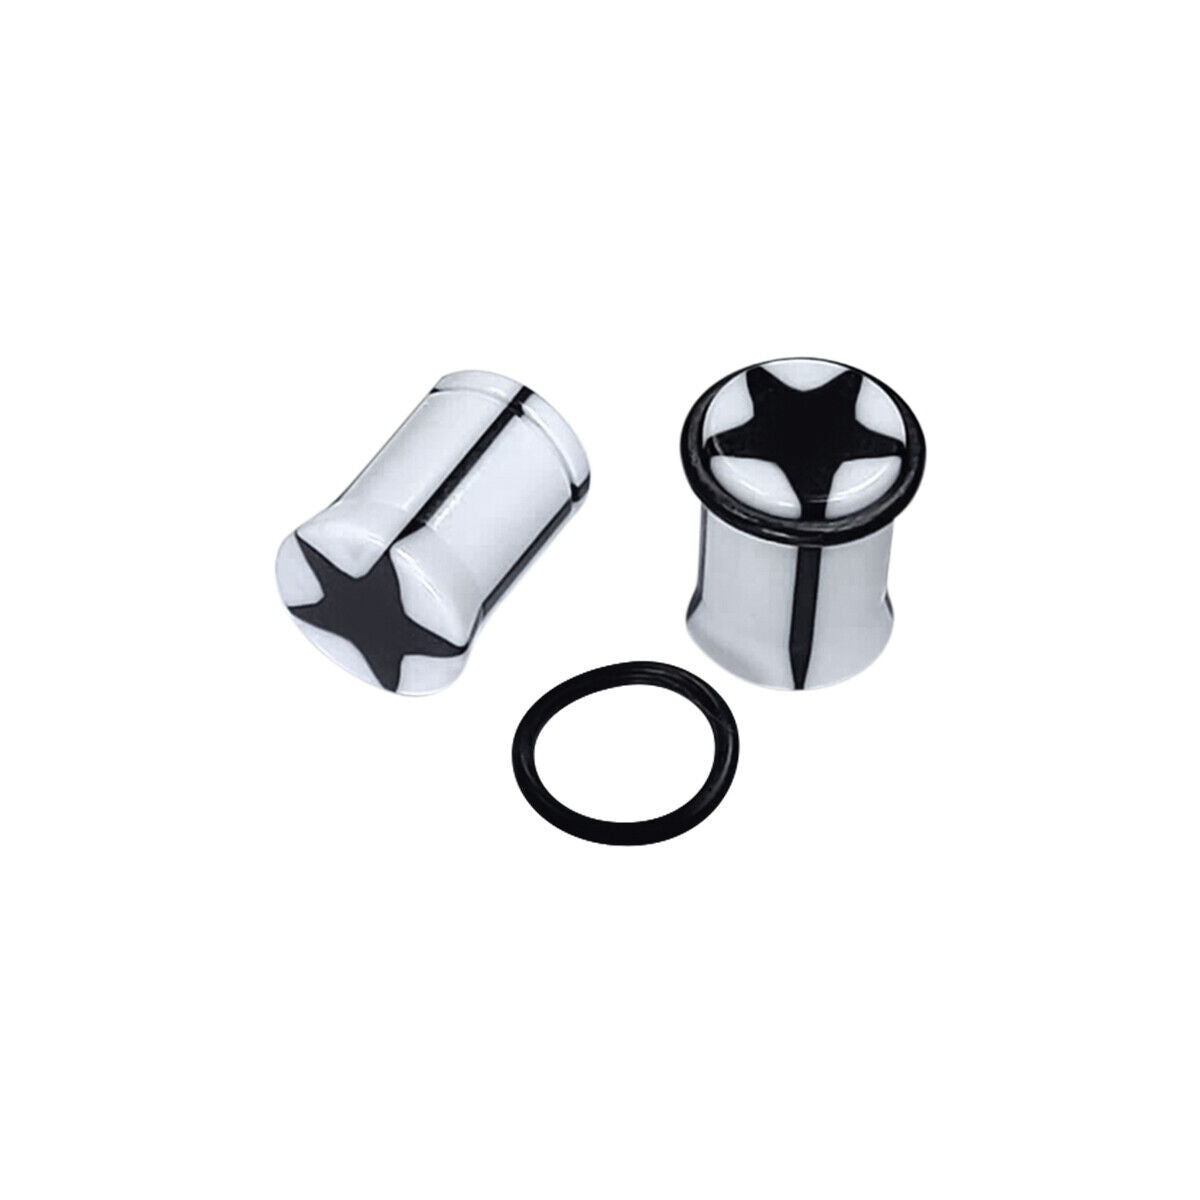 Pair of Ear Plugs Acrylic O-ring Black Star Design - Different gauges available